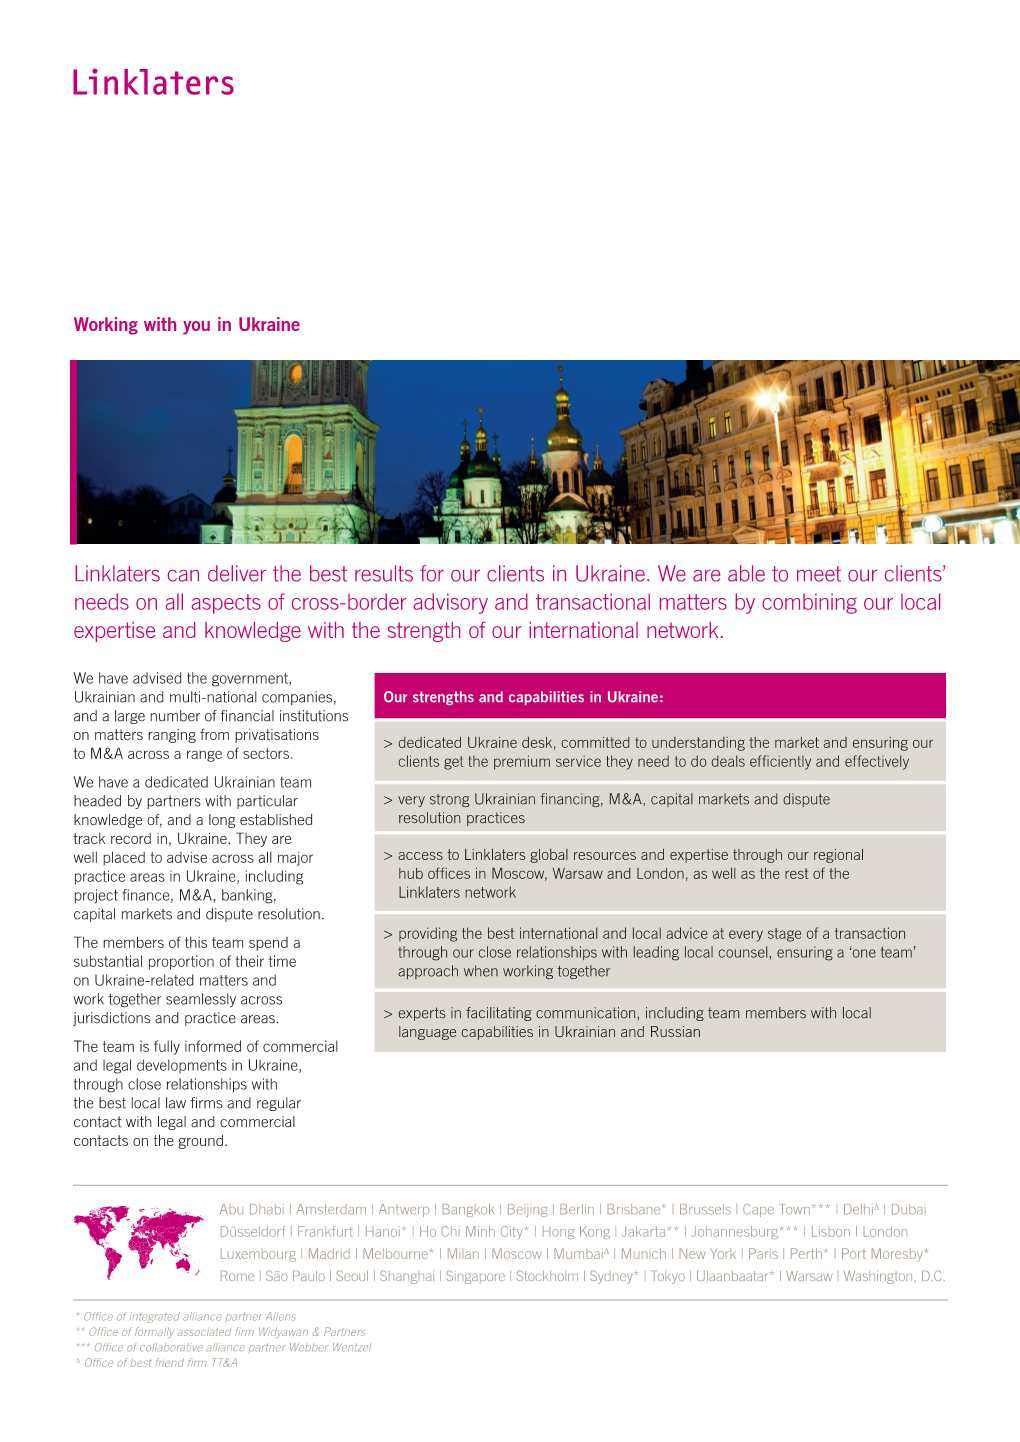 Linklaters Can Deliver the Best Results for Our Clients in Ukraine. We Are